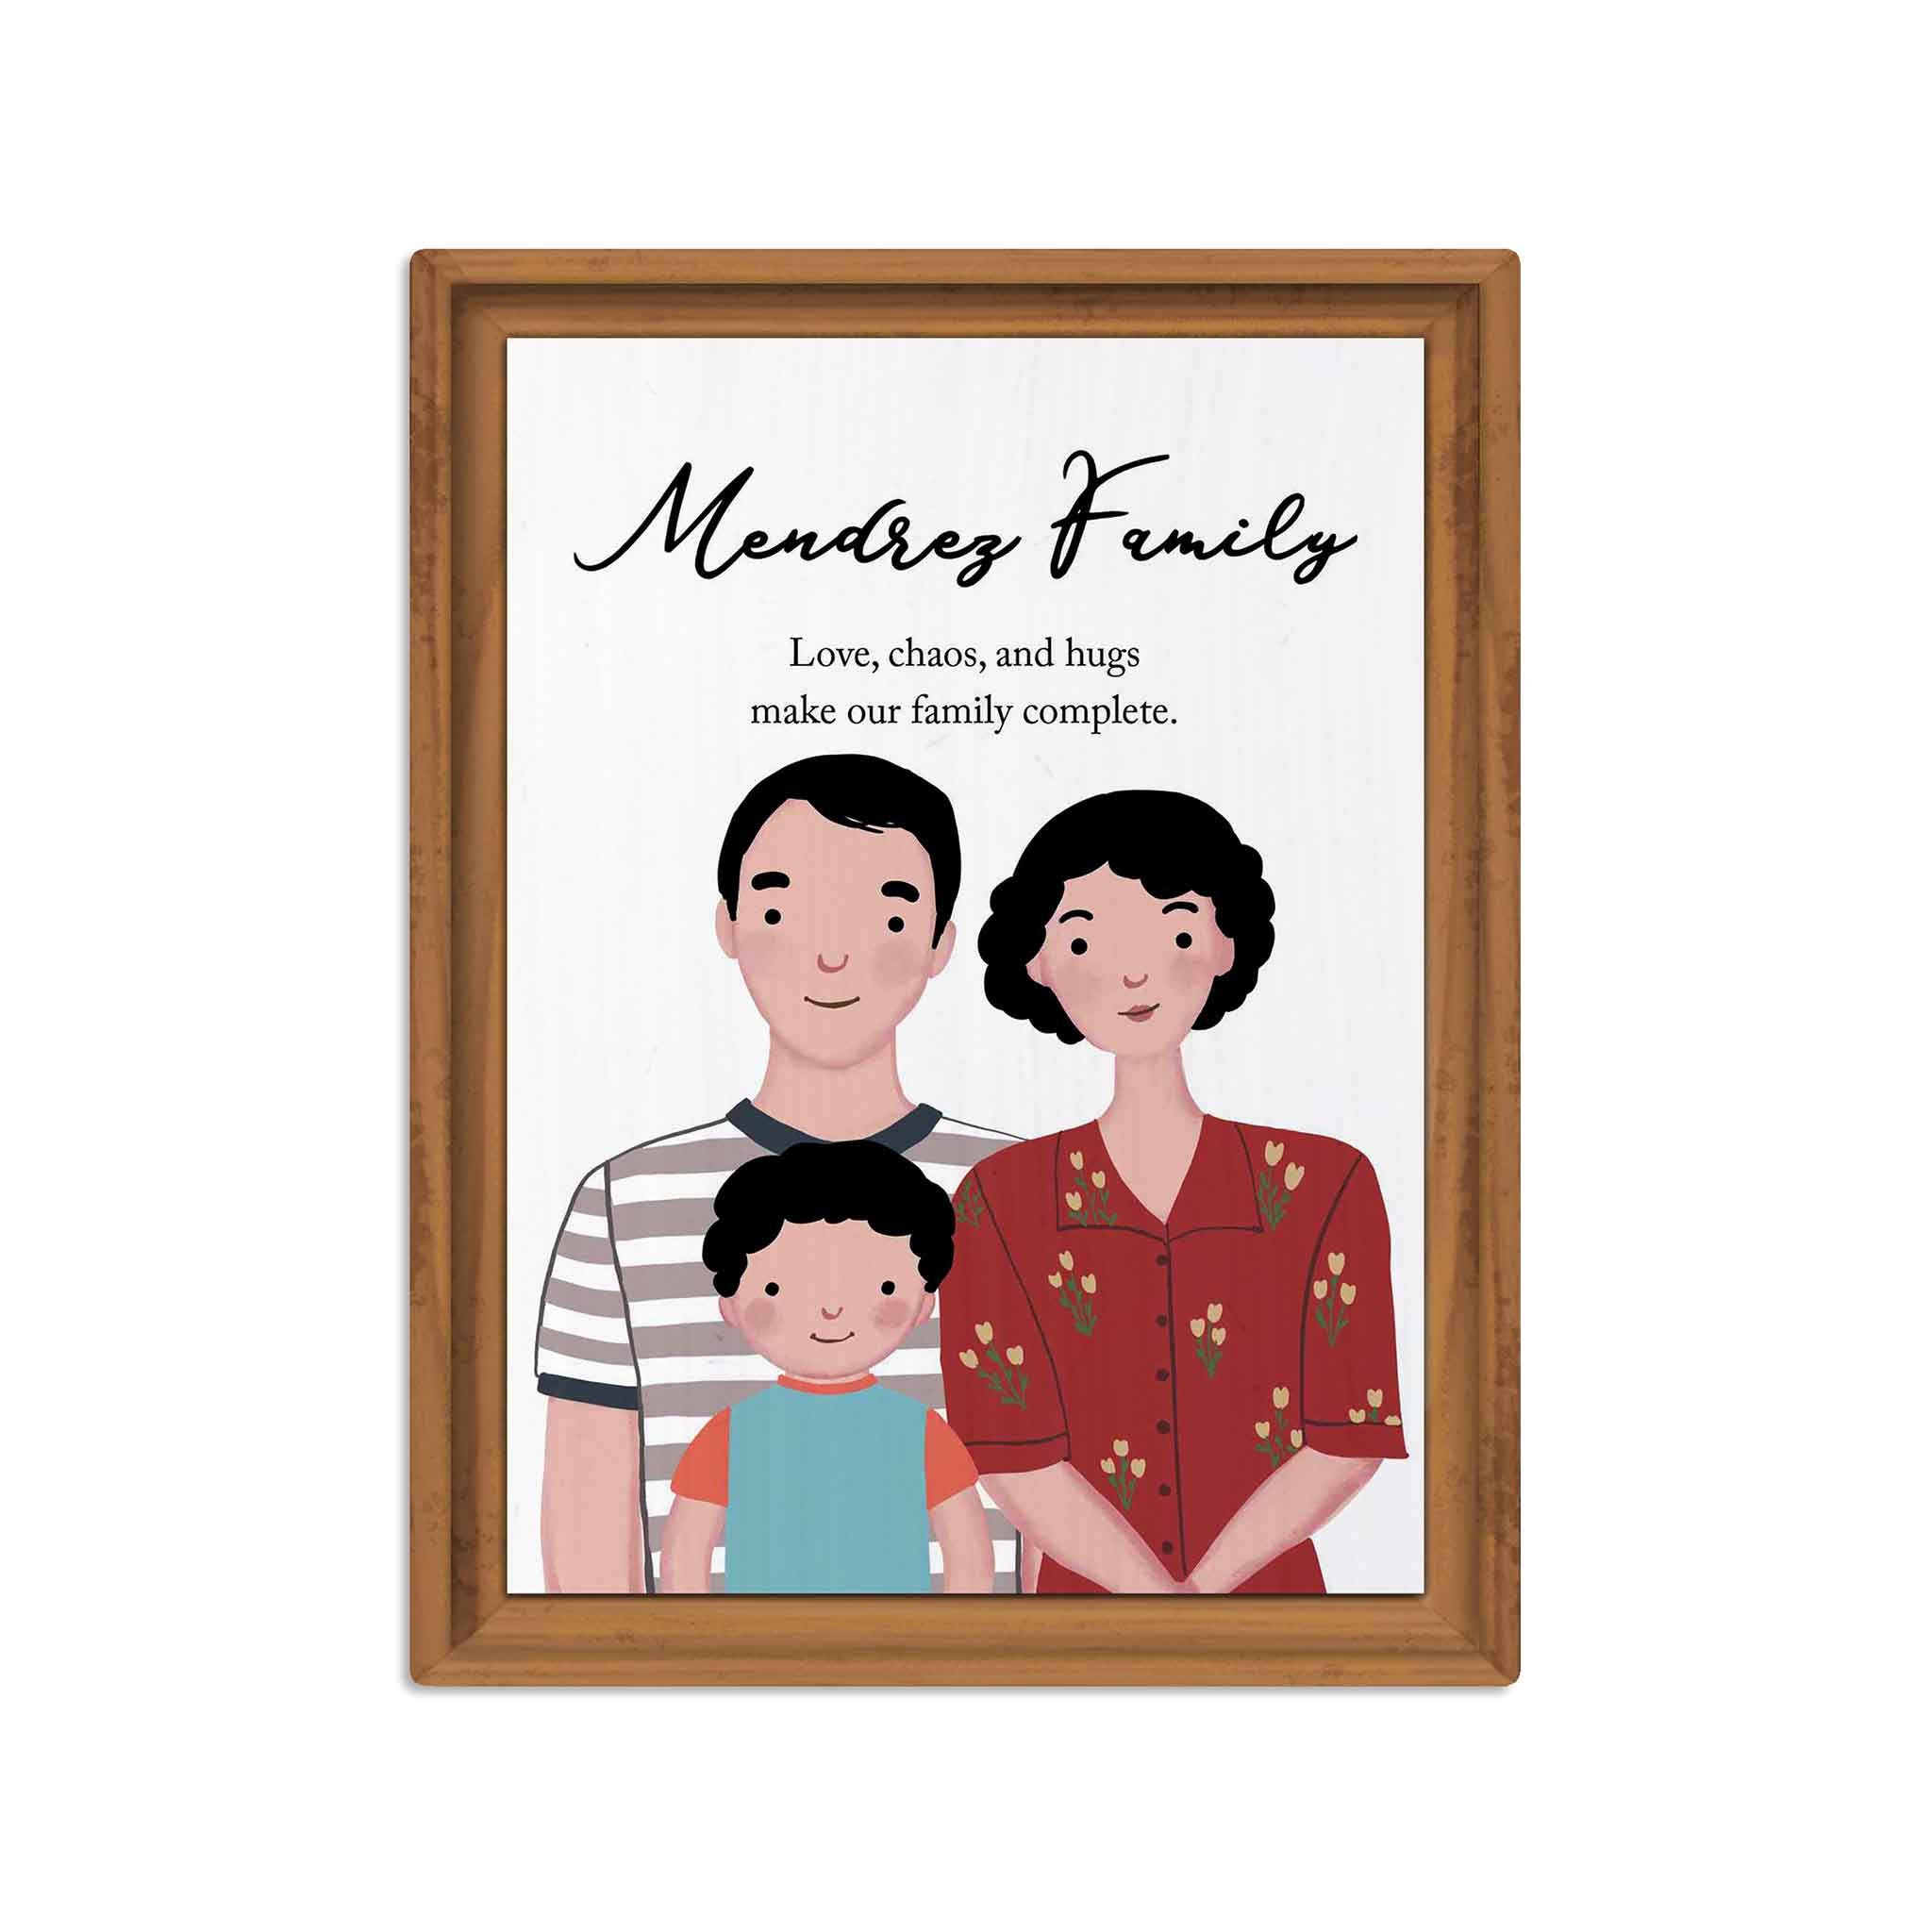 You, Me, and Family Personalized Desk Plaque